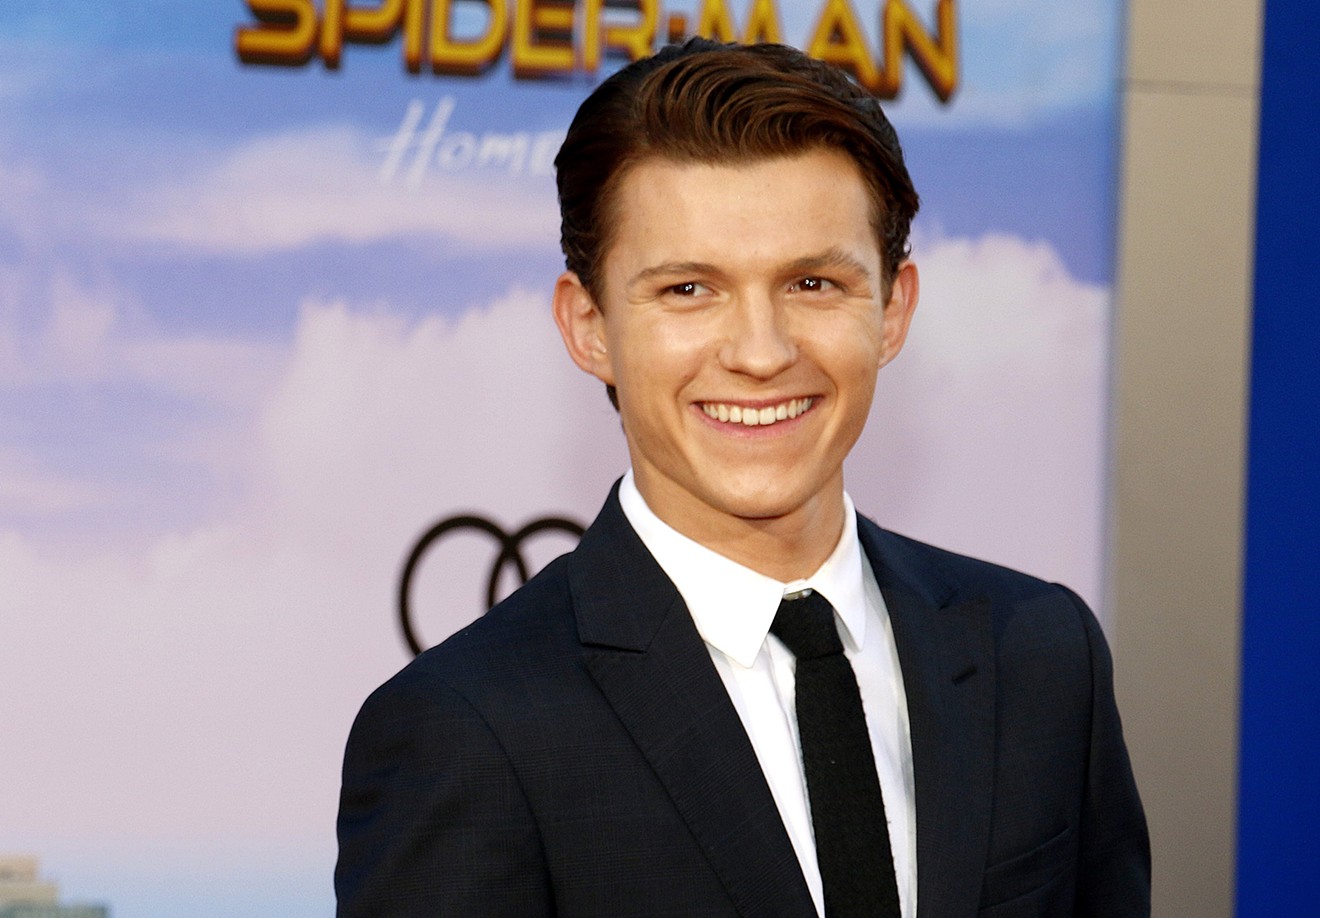 Spider-Man actor Tom Holland is one of many special guests coming to Ace Comic Con in Glendale this weekend.